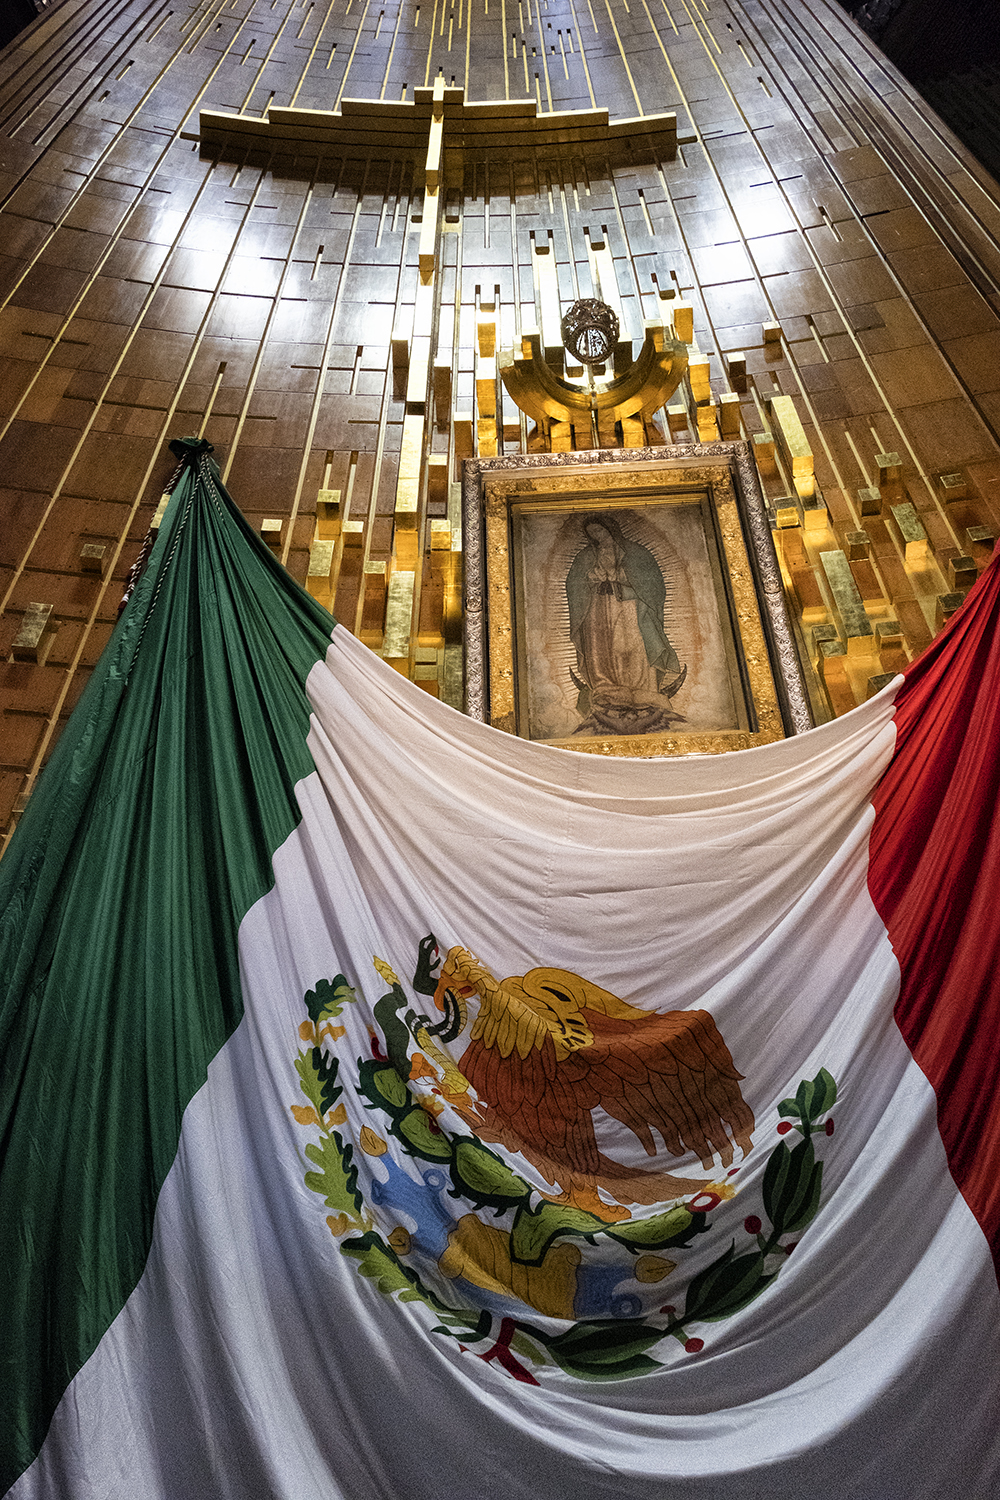 In the Basilica of Our Lady of Guadalupe, Mexico City